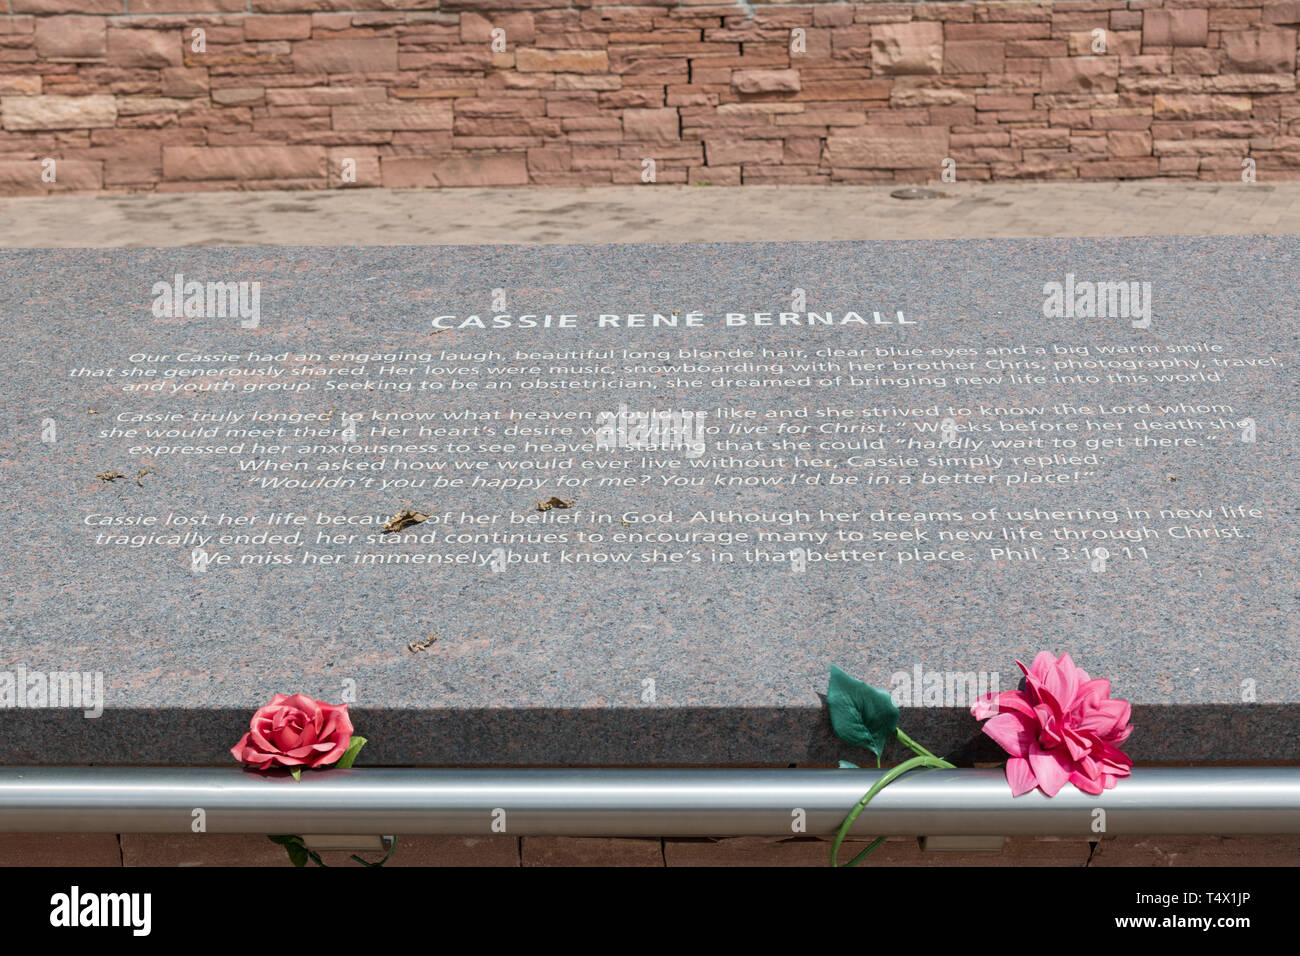 Marker for Cassie Bernall at the memorial for the victims of the Columbine High School mass shooting in Columbine, Colorado. Bernall was one of the 12 students and one teacher killed on April 20, 1999 by shooters Eric Harris and Dylan Klebold, who then took their own lives. Stock Photo